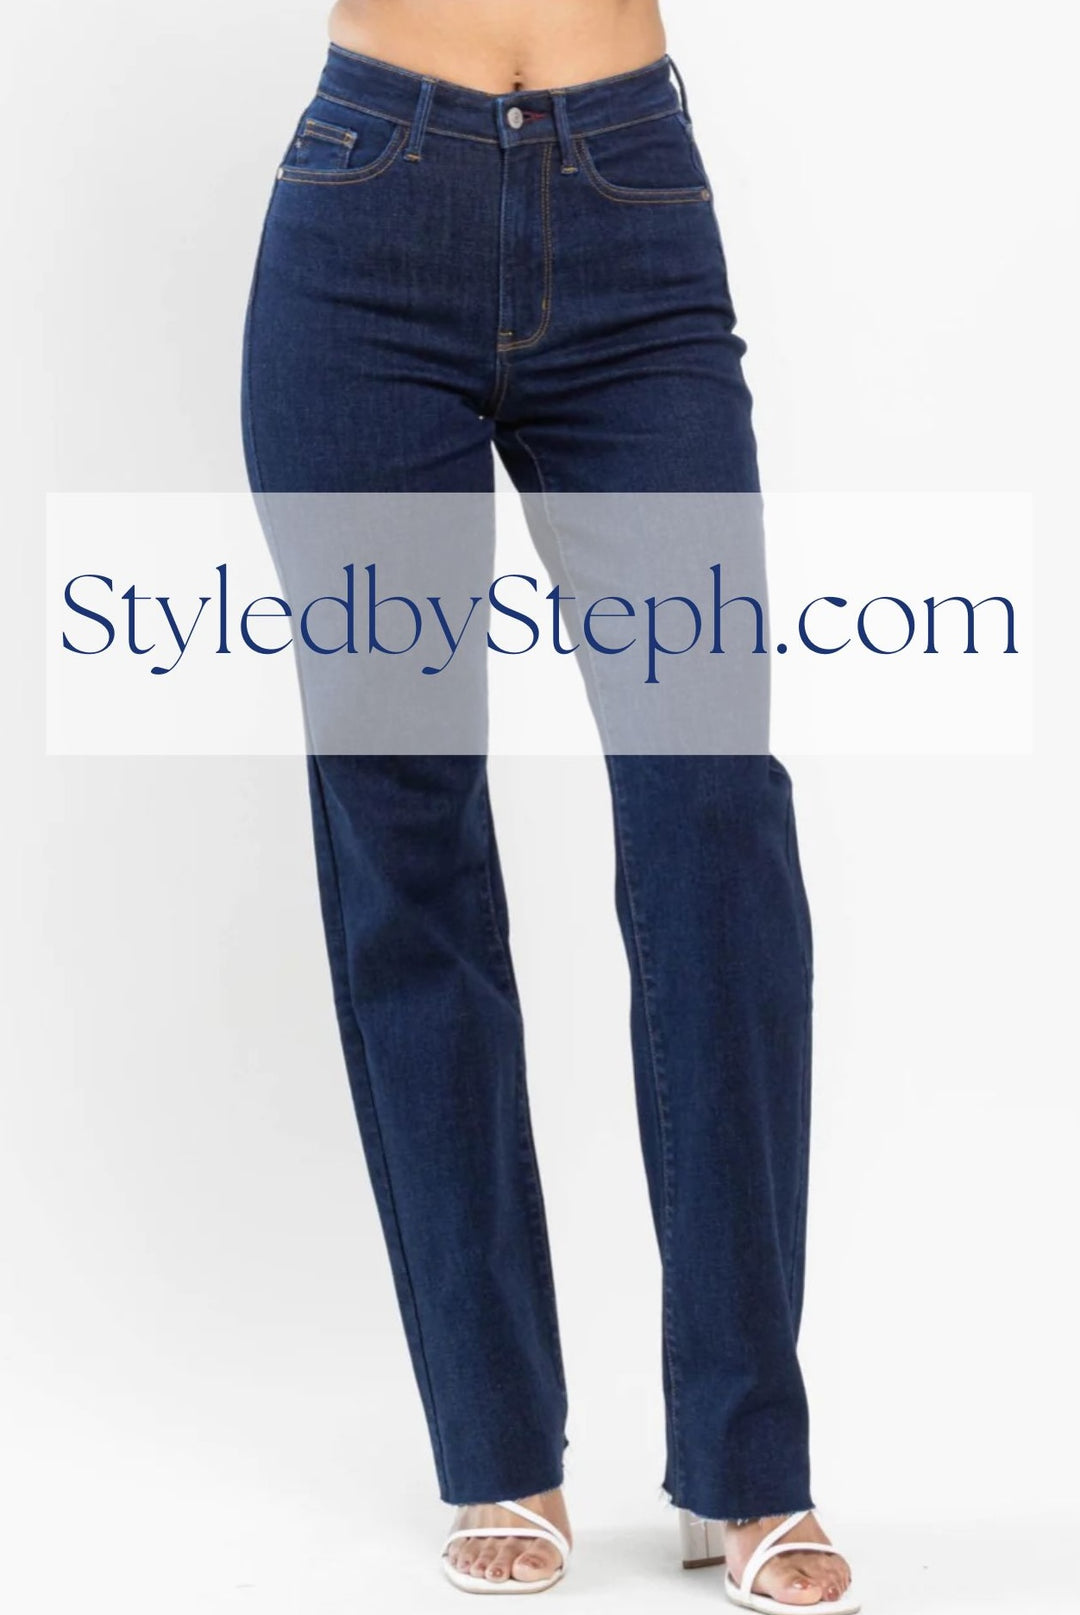 Sizing Guide for Judy Blue Jeans Styled by Steph Online Boutique Granger, IN